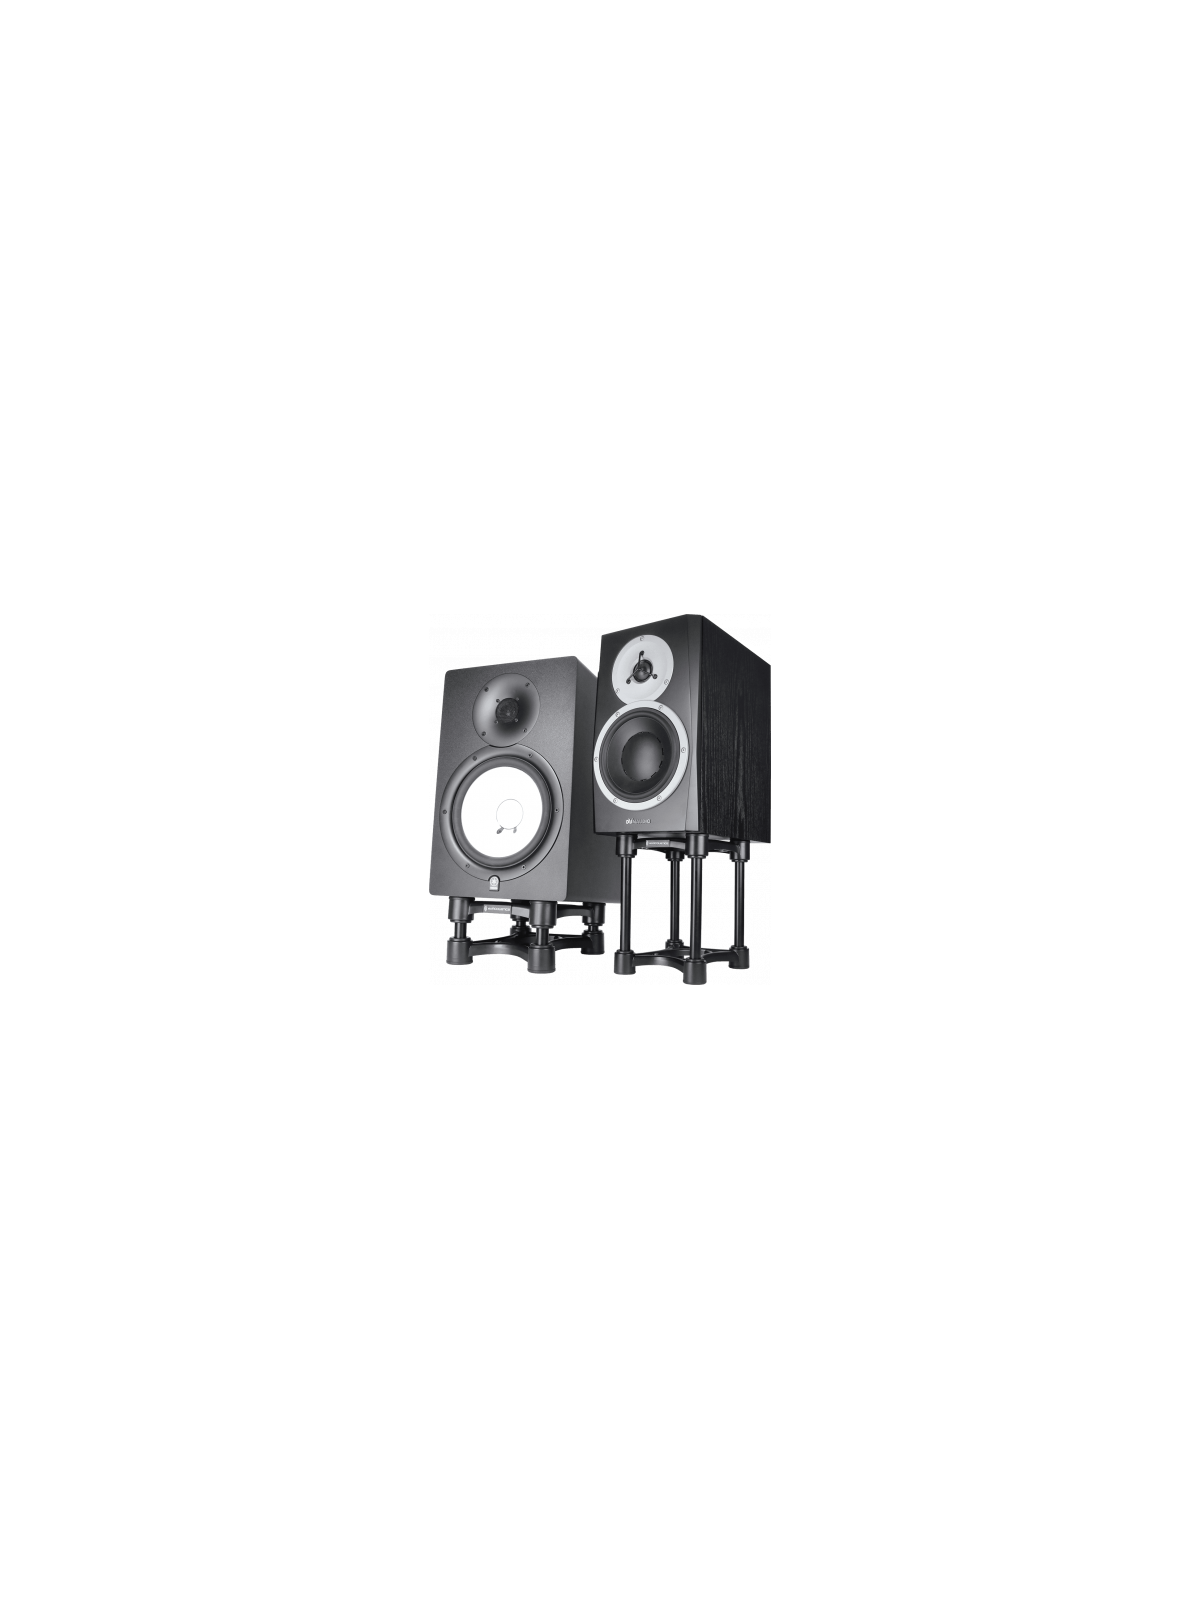 ISOACOUSTICS - 2 supports Monitor